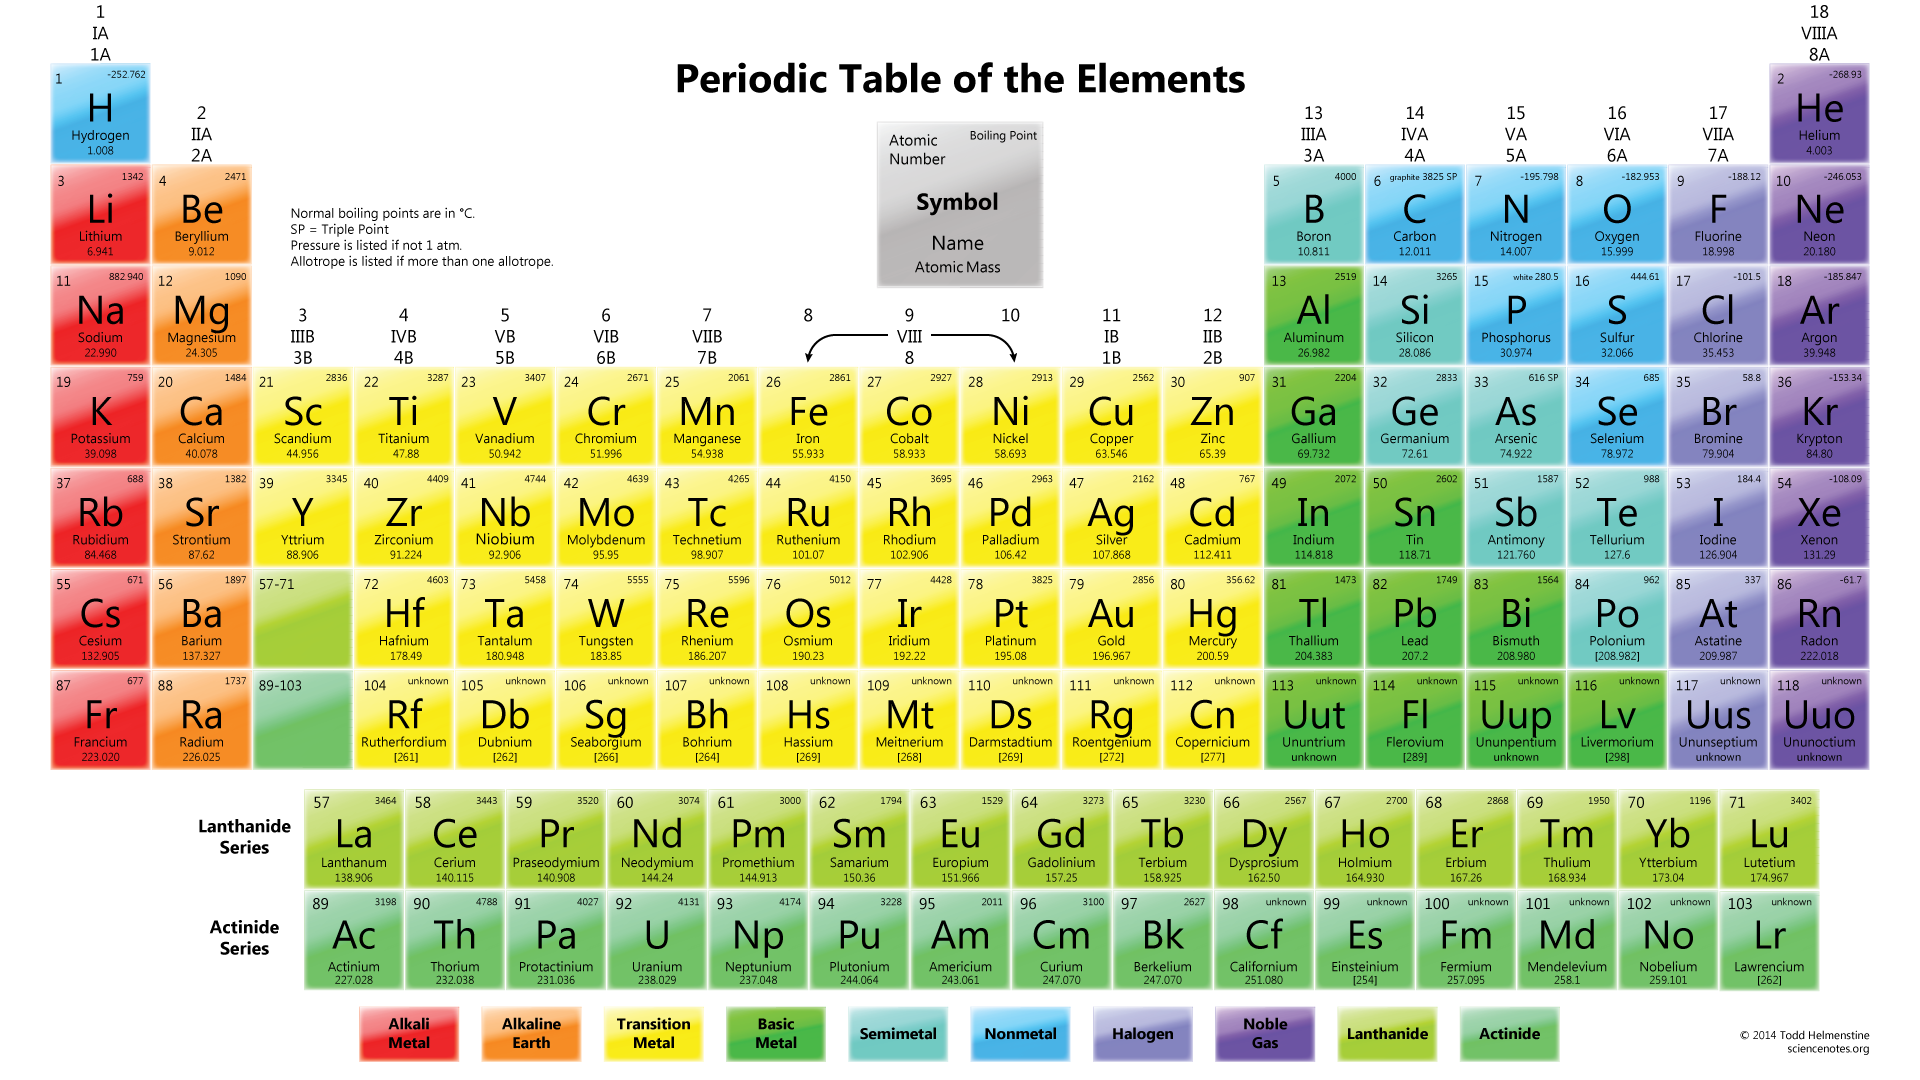 PeriodicTableBoilingPoint